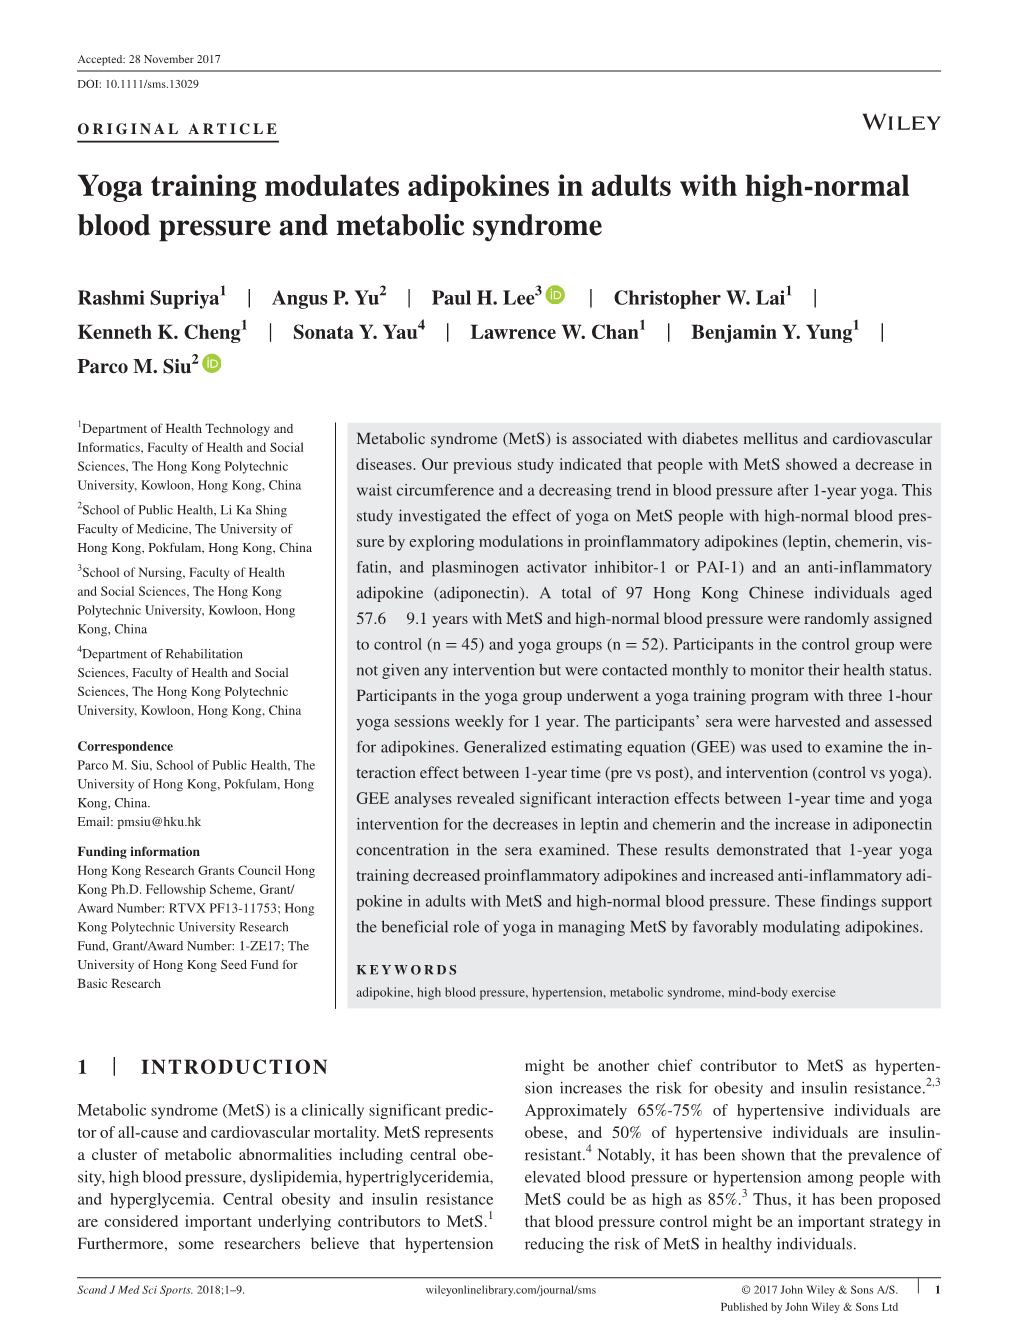 Yoga Training Modulates Adipokines in Adults with High- Normal Blood